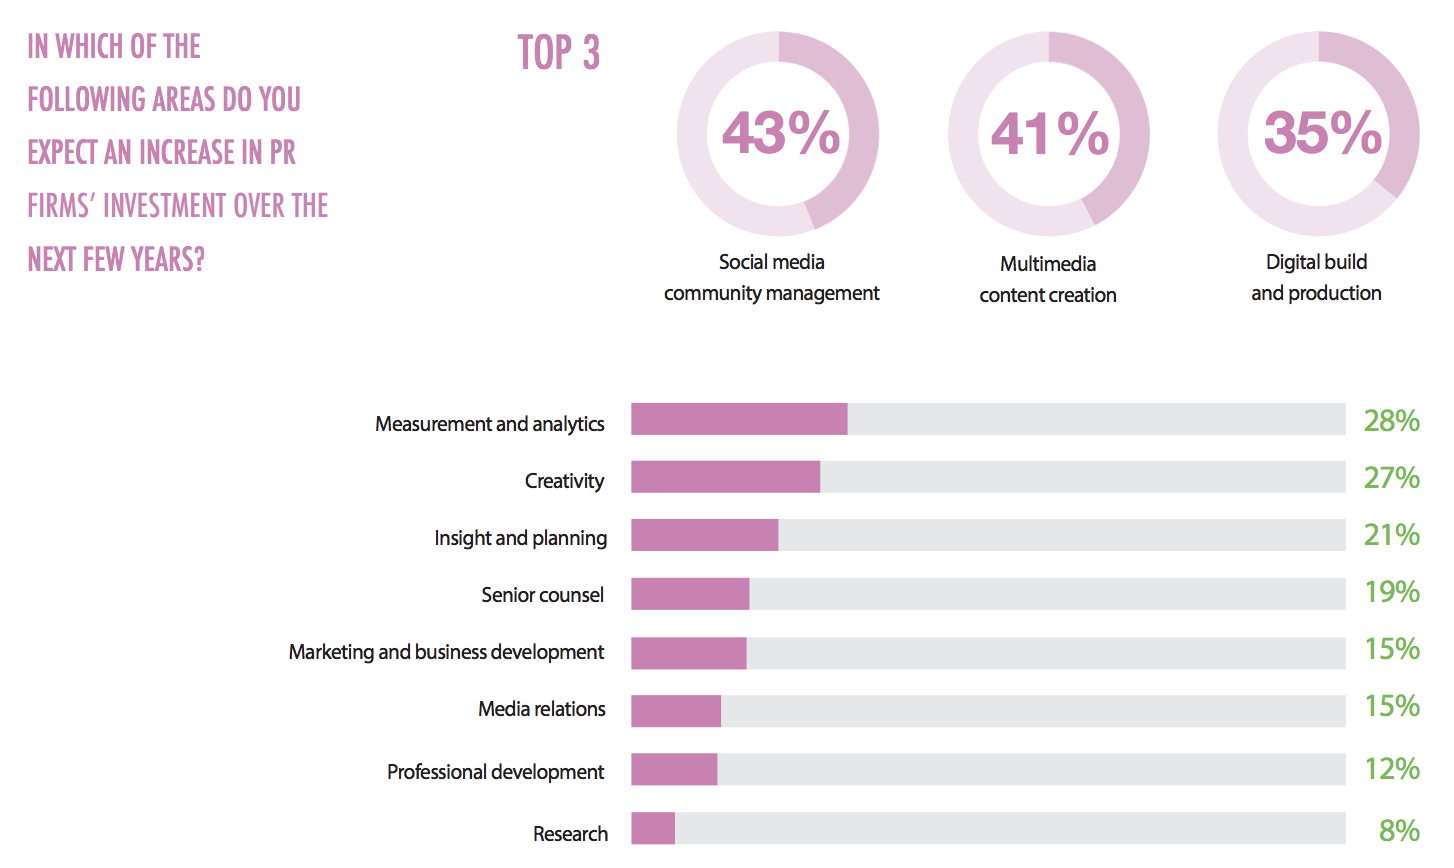 social media community management top for PR in the future